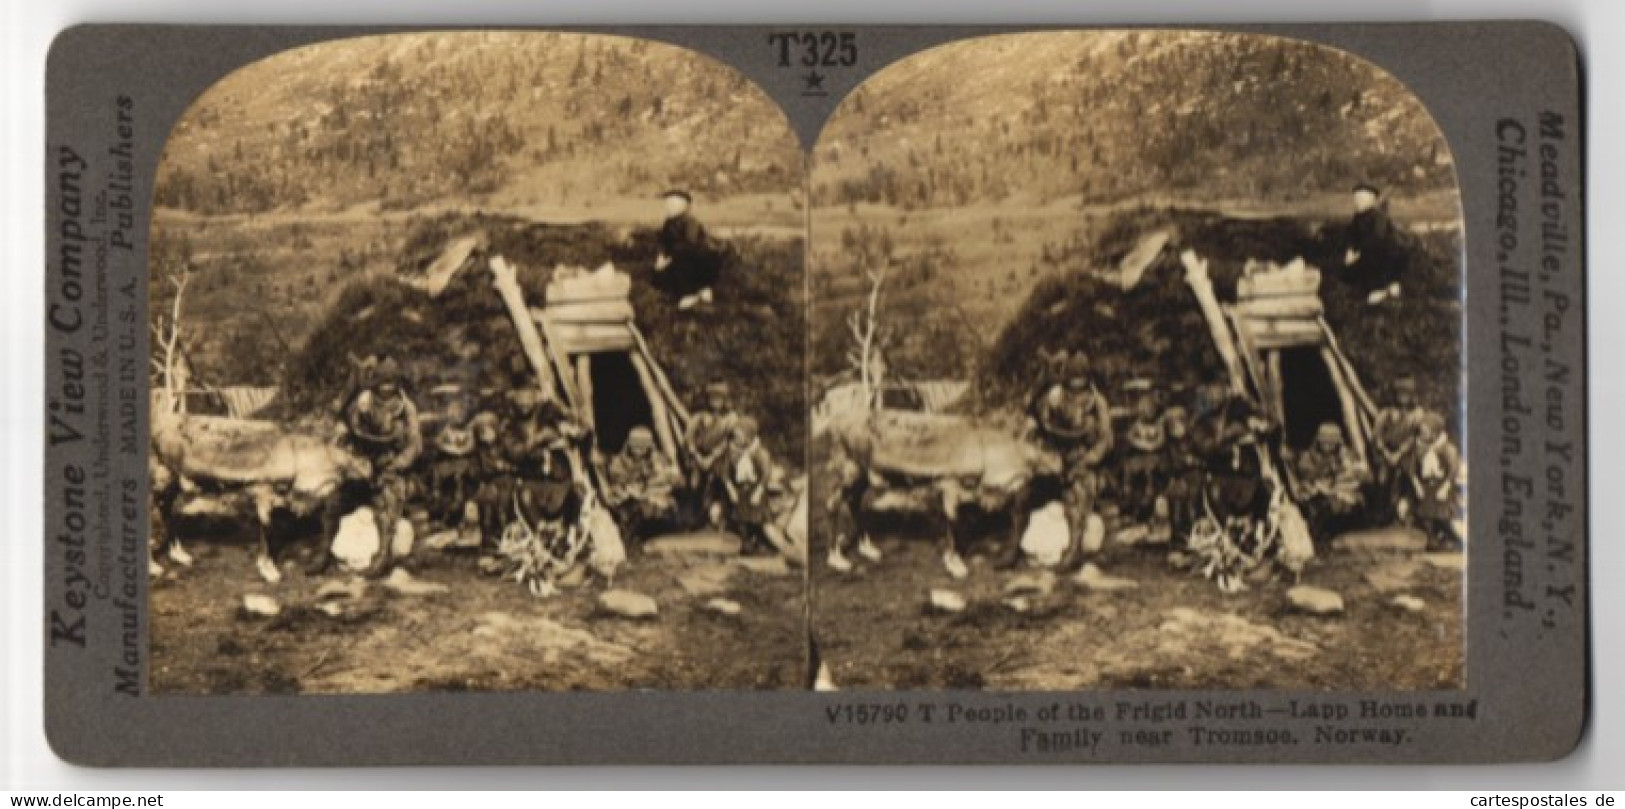 Stereo-Fotografie Keystone View Co., Meadville, Ansicht Tromsoe, Lapp Home And Family, People Of The Frigid North  - Photos Stéréoscopiques